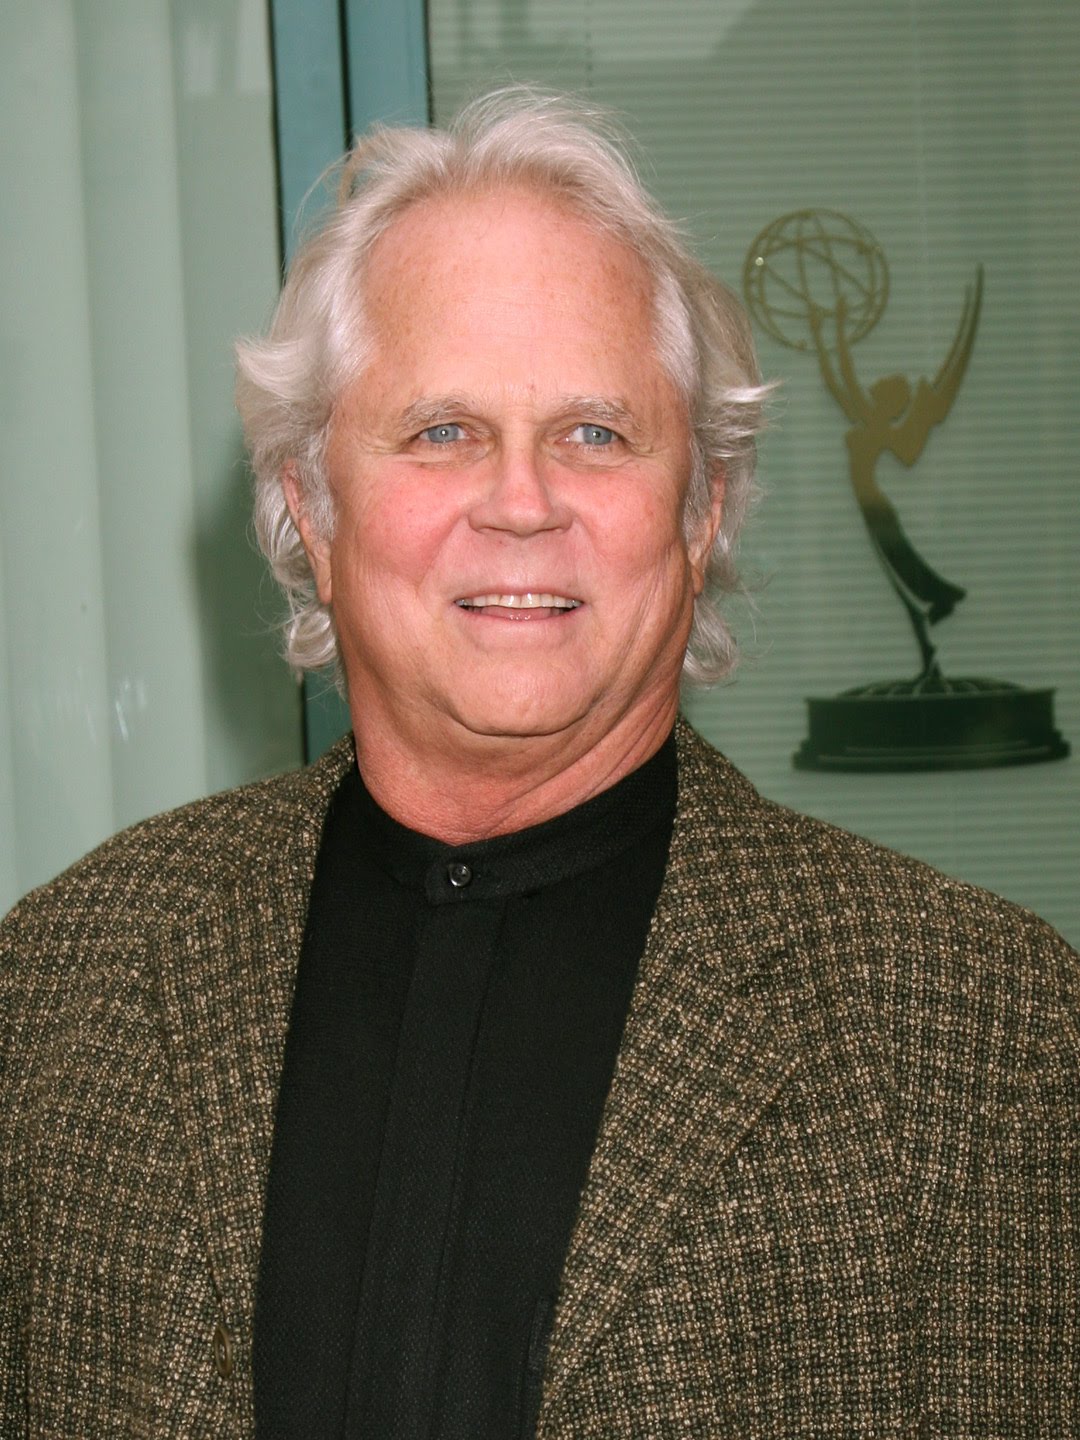 Saw on MeTv EarlerThat Tony Dow Passed Away Today at 77 Heard it say Ad abo...